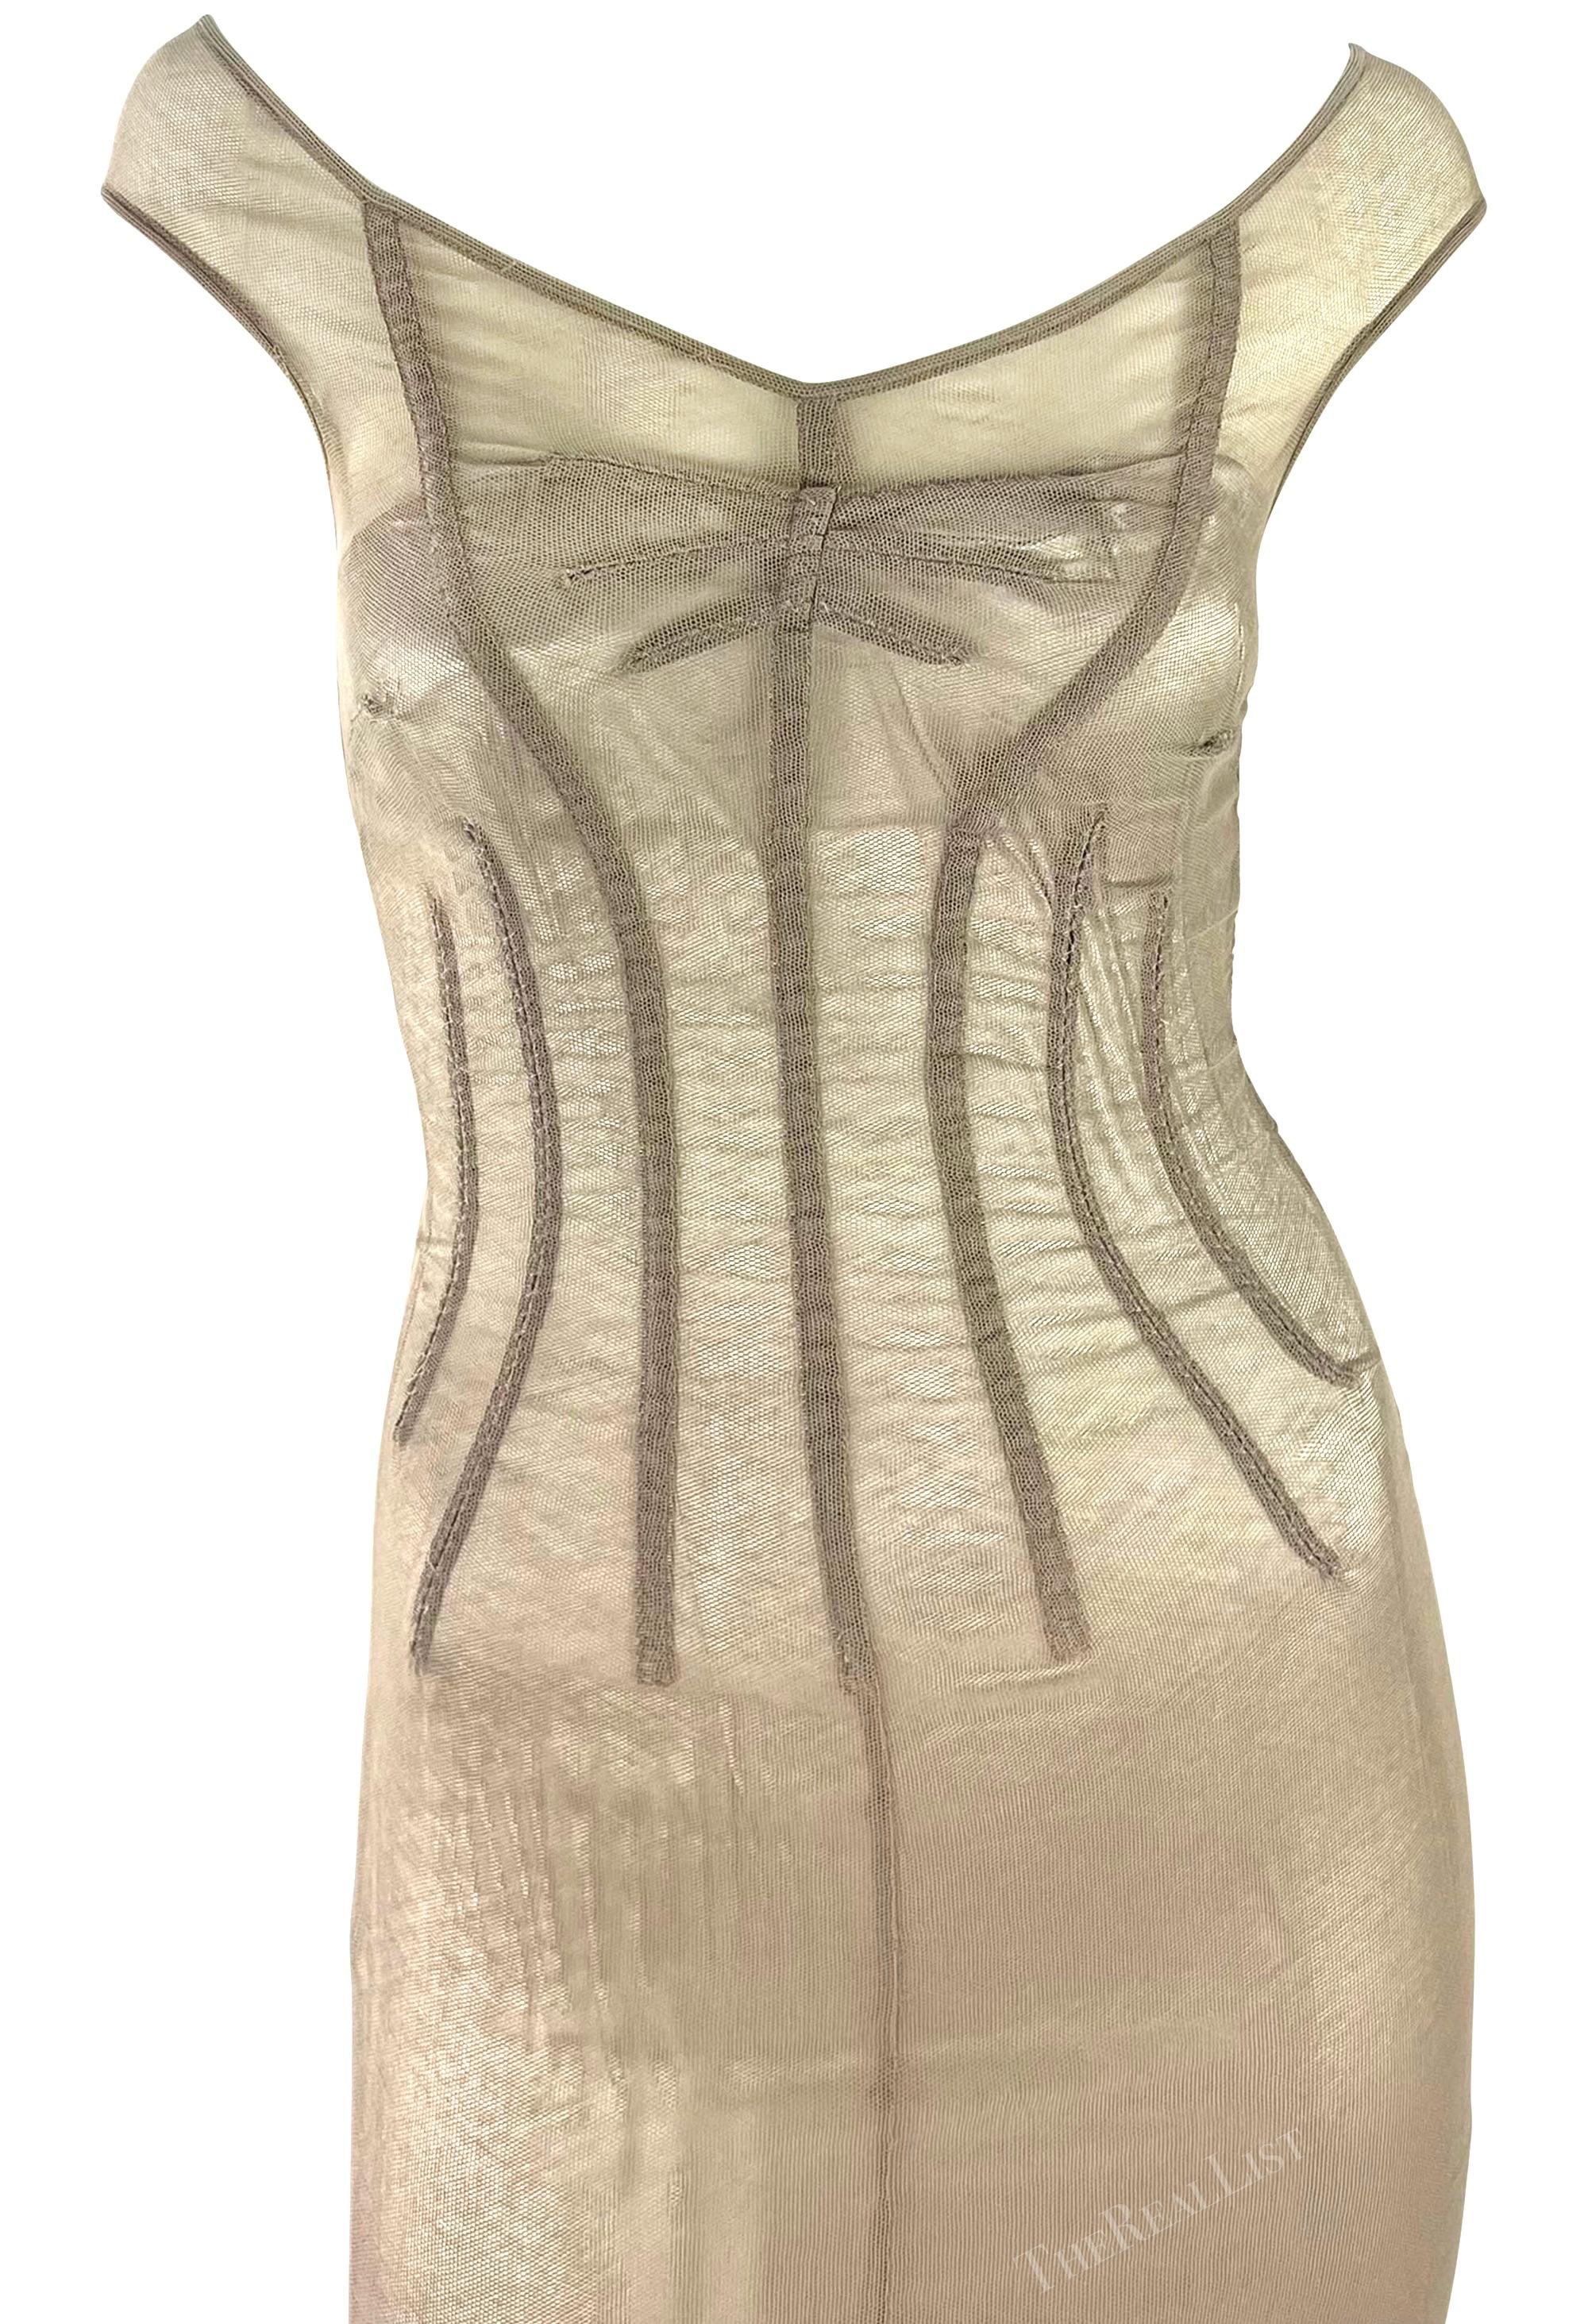 S/S 1998 Dolce & Gabbana 'Stromboli' Taupe Mesh Silver Bodycon Boned Gown  In Excellent Condition For Sale In West Hollywood, CA